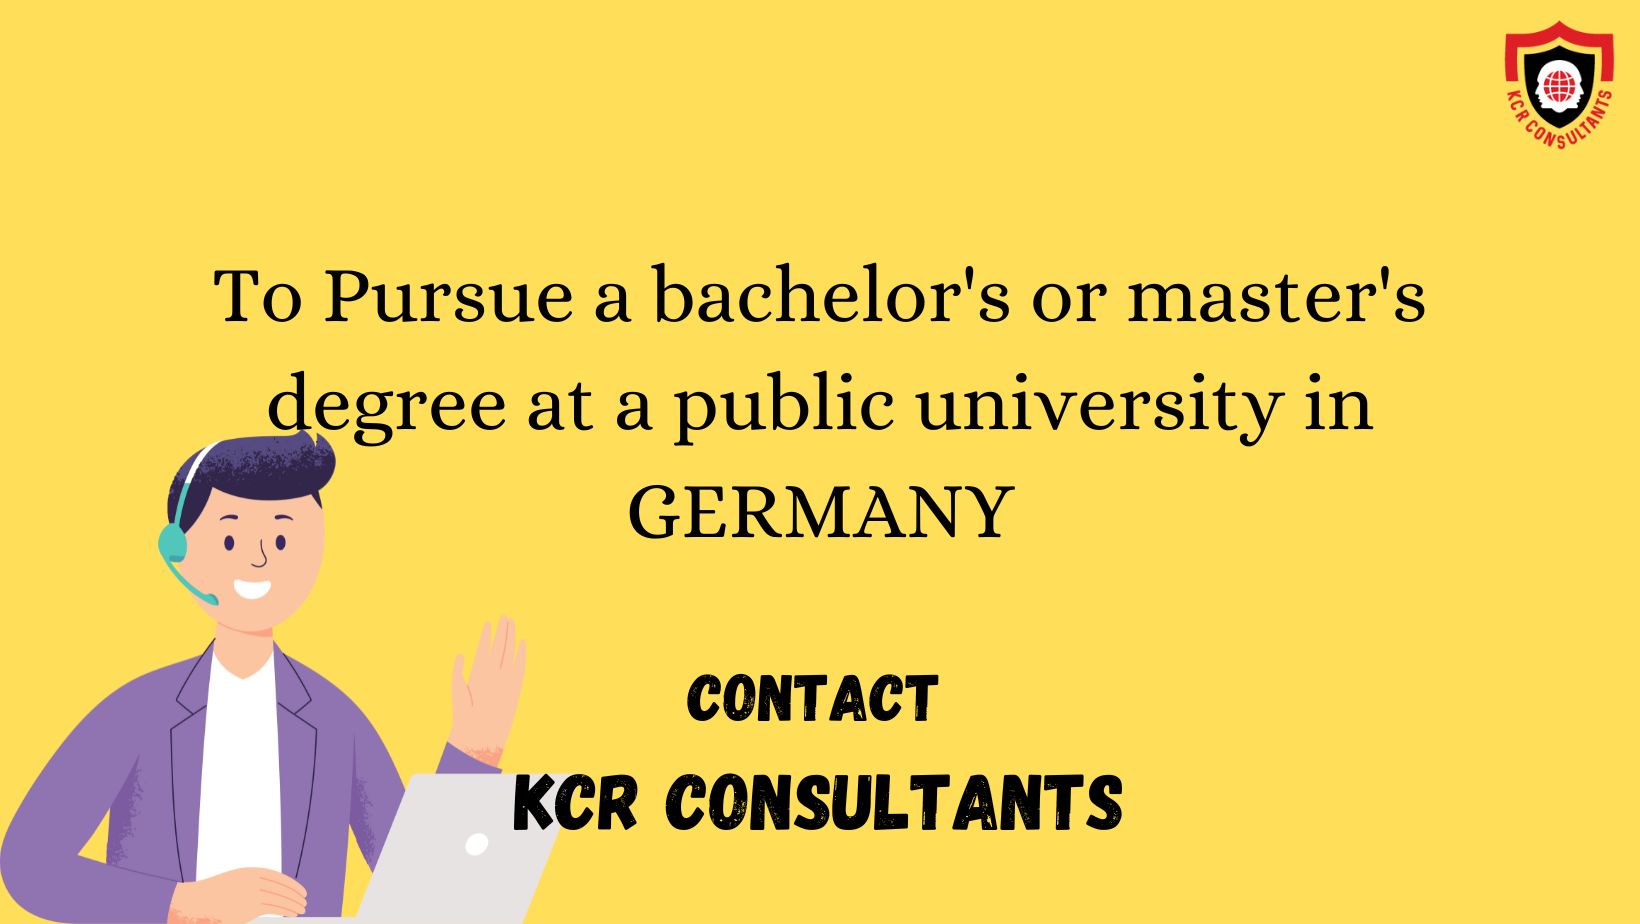 KARLSRUHE INSTITUTE OF TECHNOLOGY (KIT) - KCR CONSULTANTS - Contact us